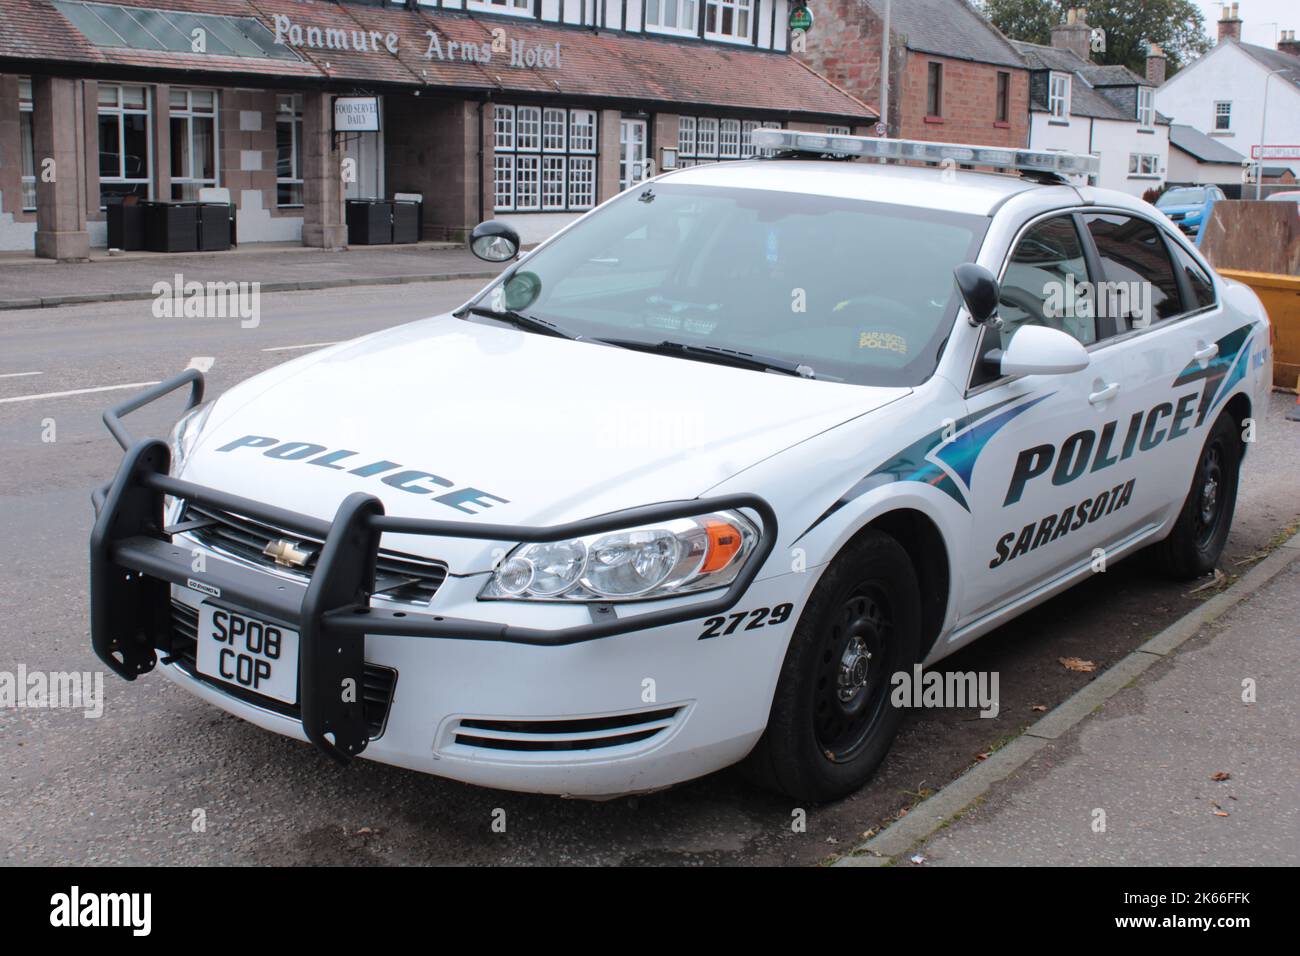 Sarasota police car parked on the road in Edzell Scotland 11-20-2022 Stock Photo